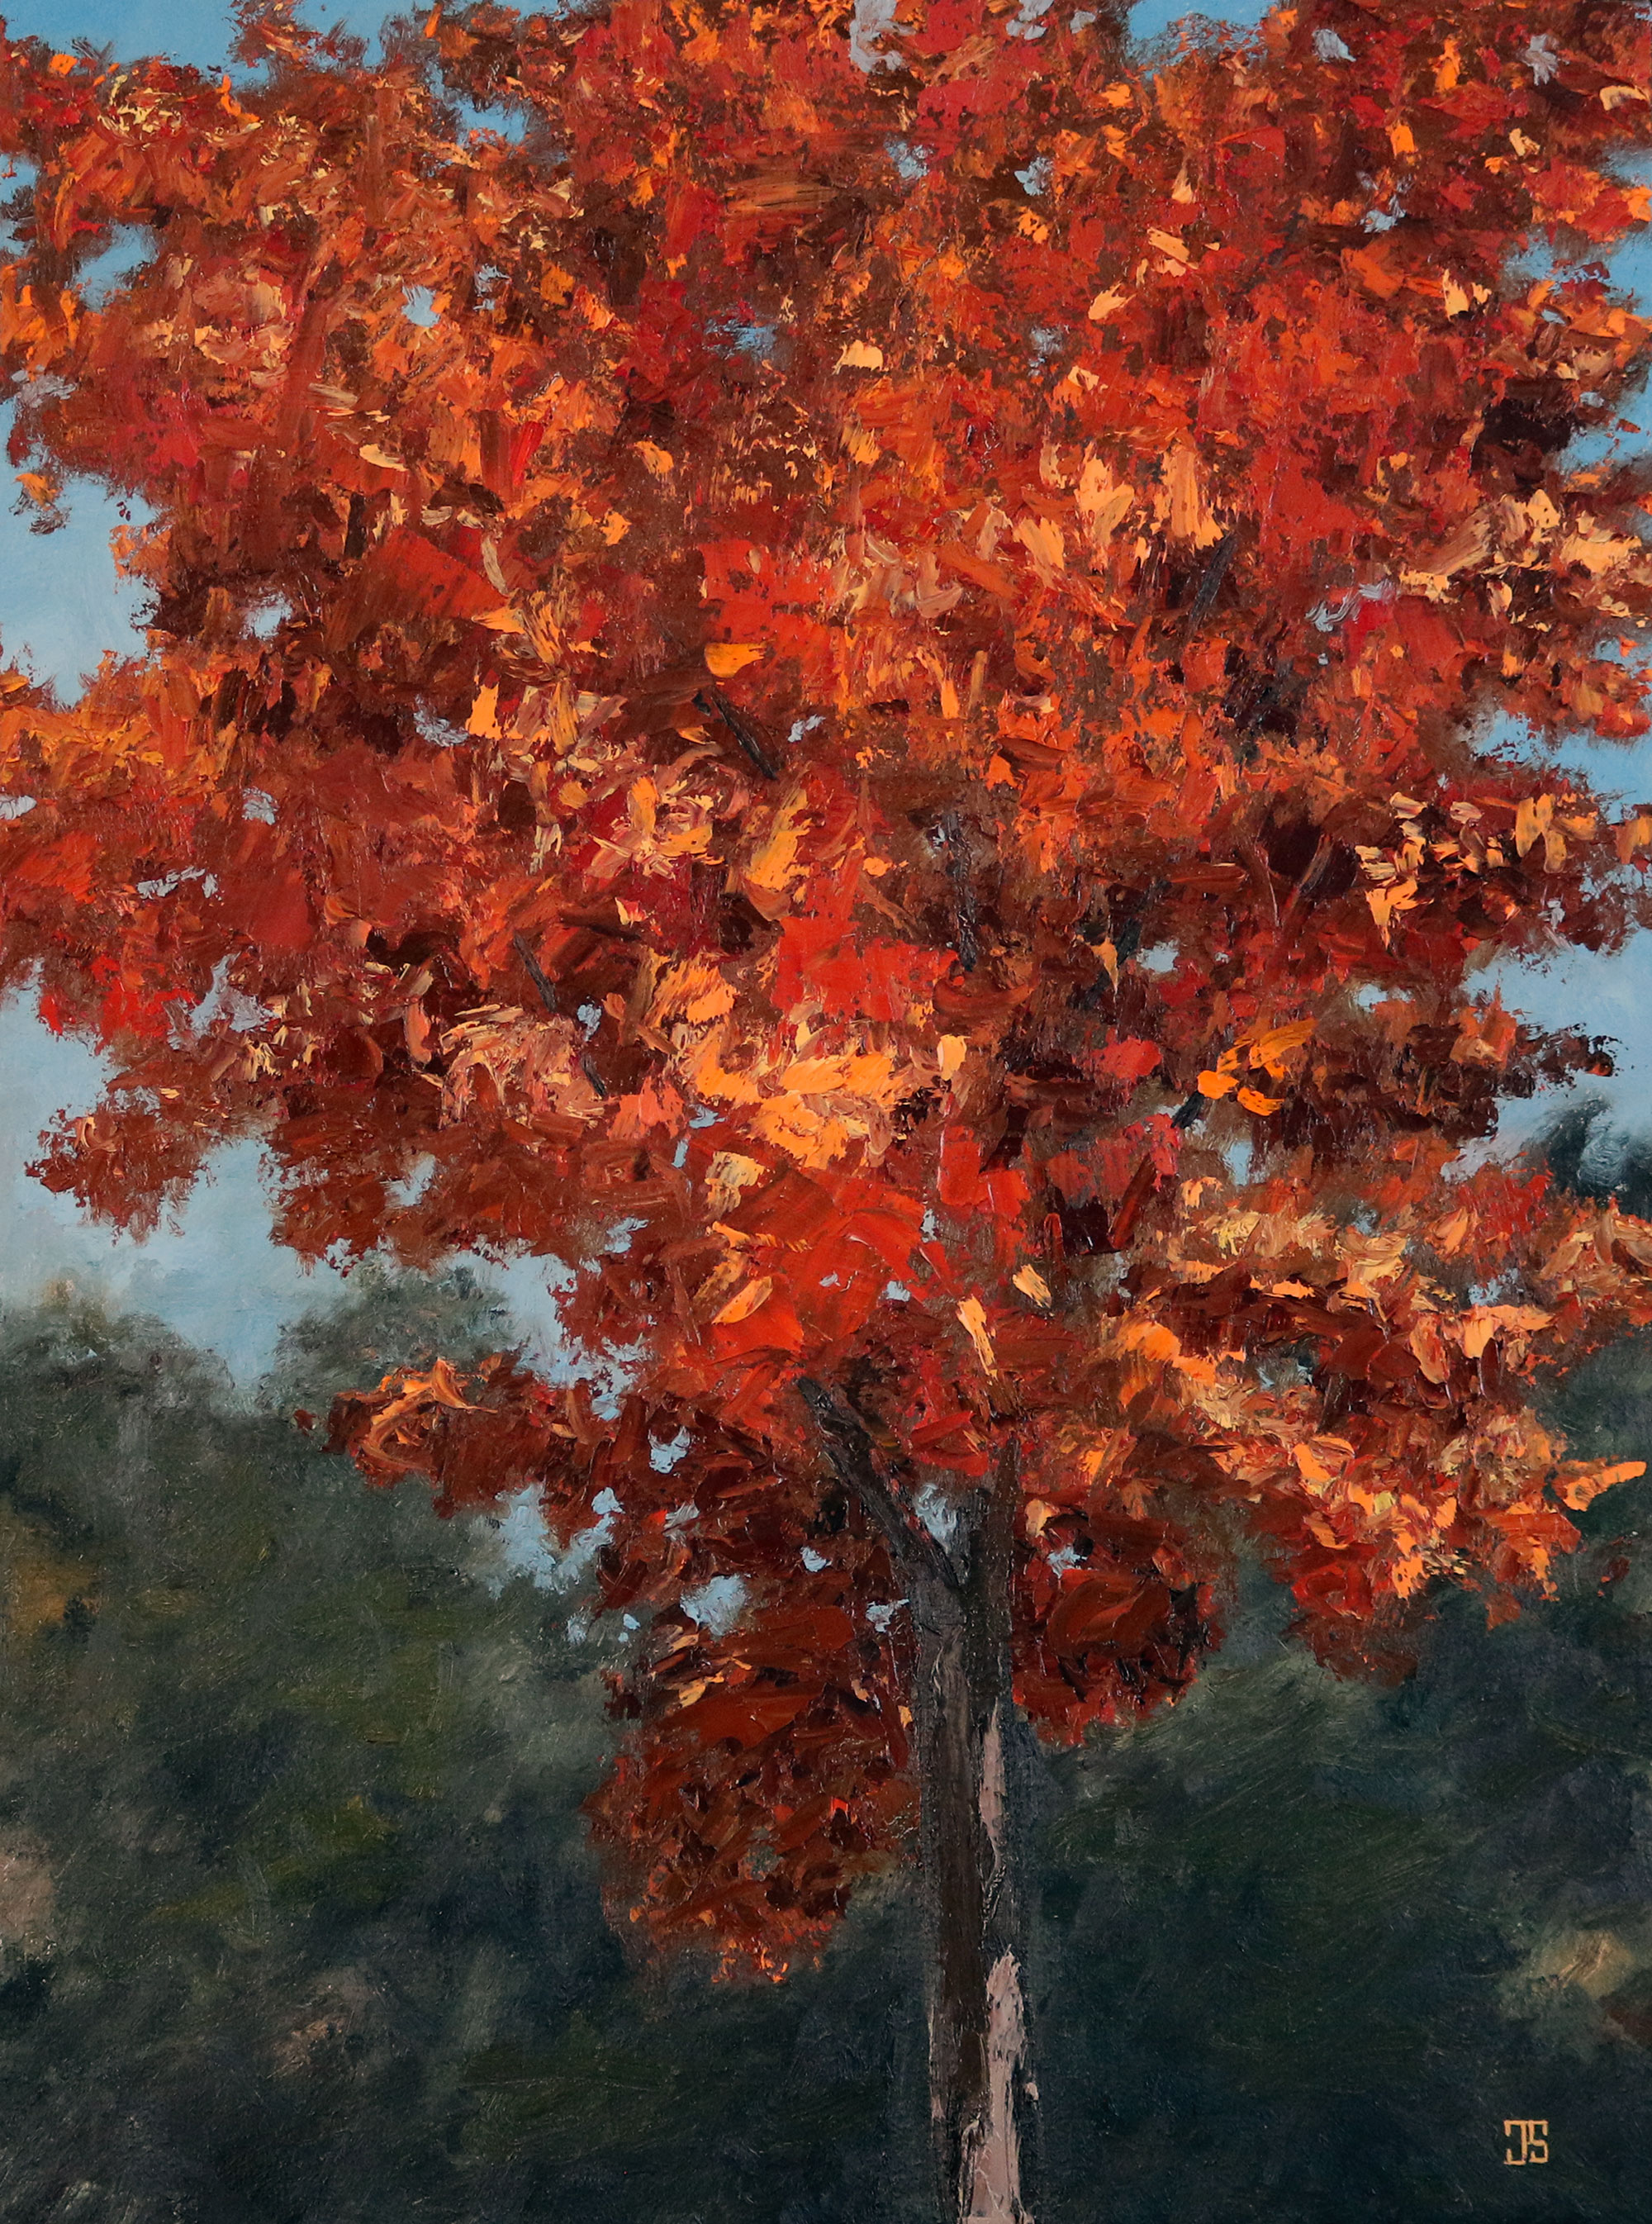 Oil painting "Red Tree" by Jeffrey Dale Starr